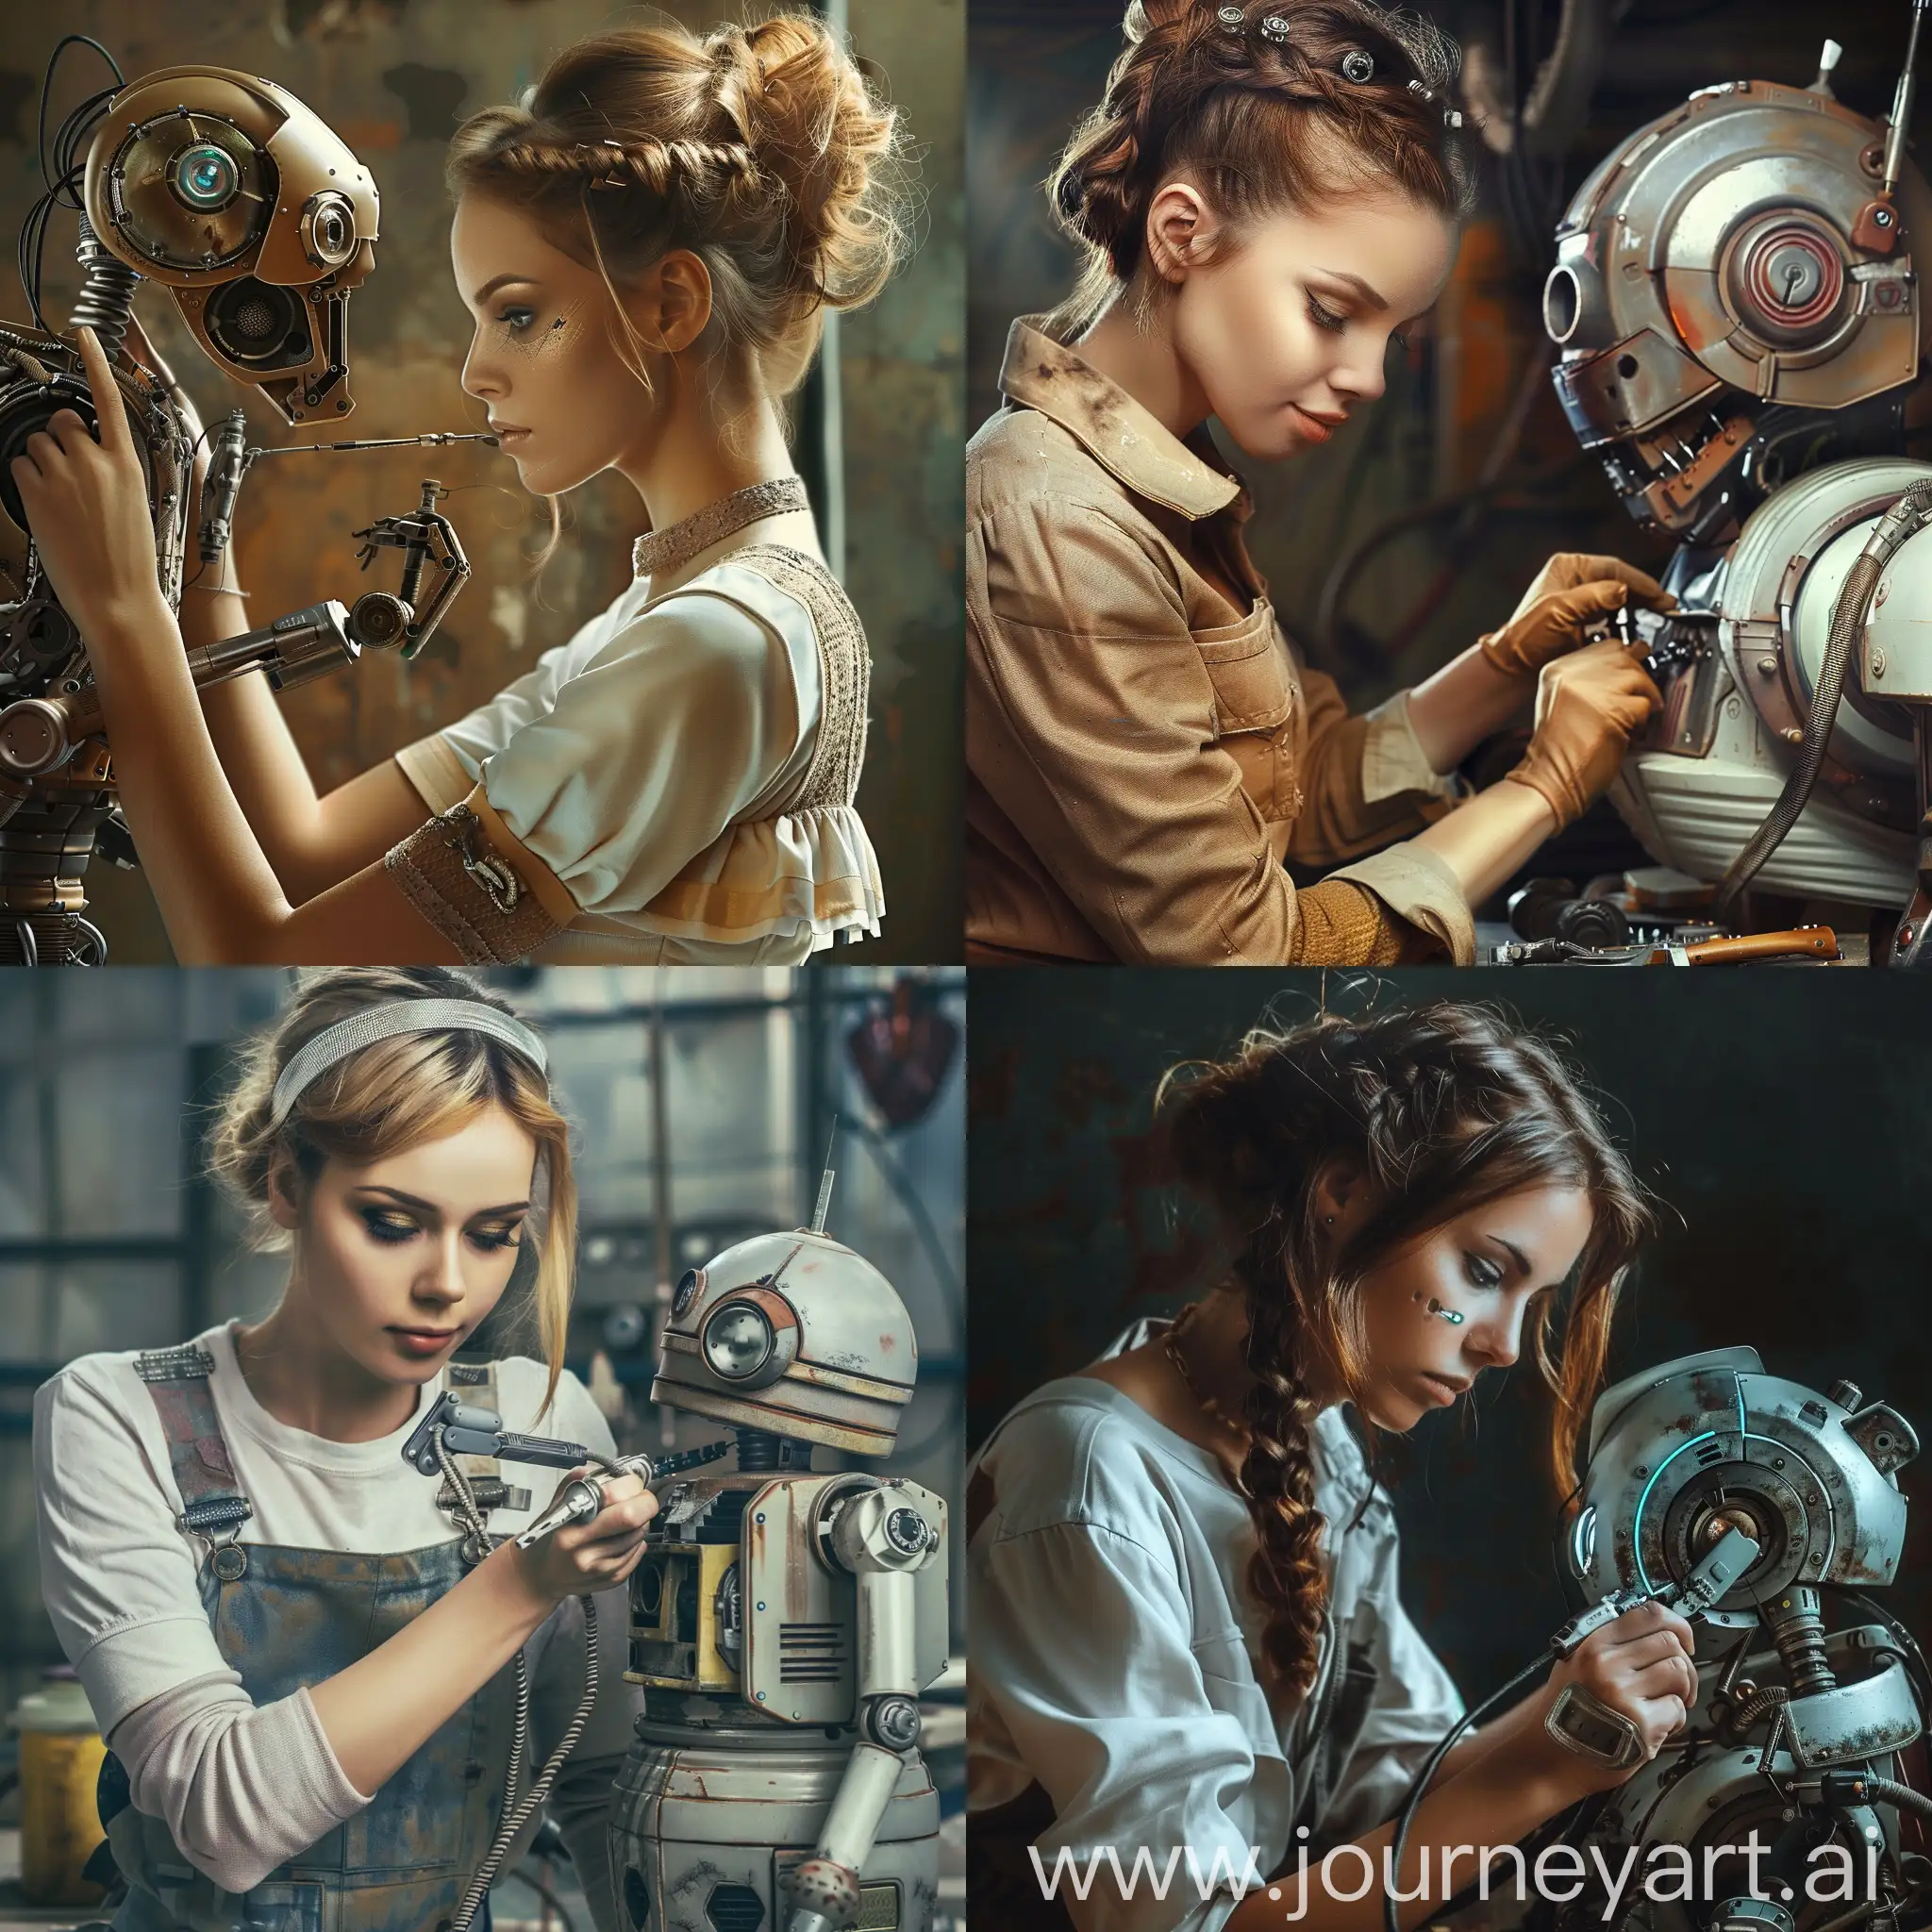 Skilled-Woman-Repairing-Robot-Futuristic-Technology-and-Beauty